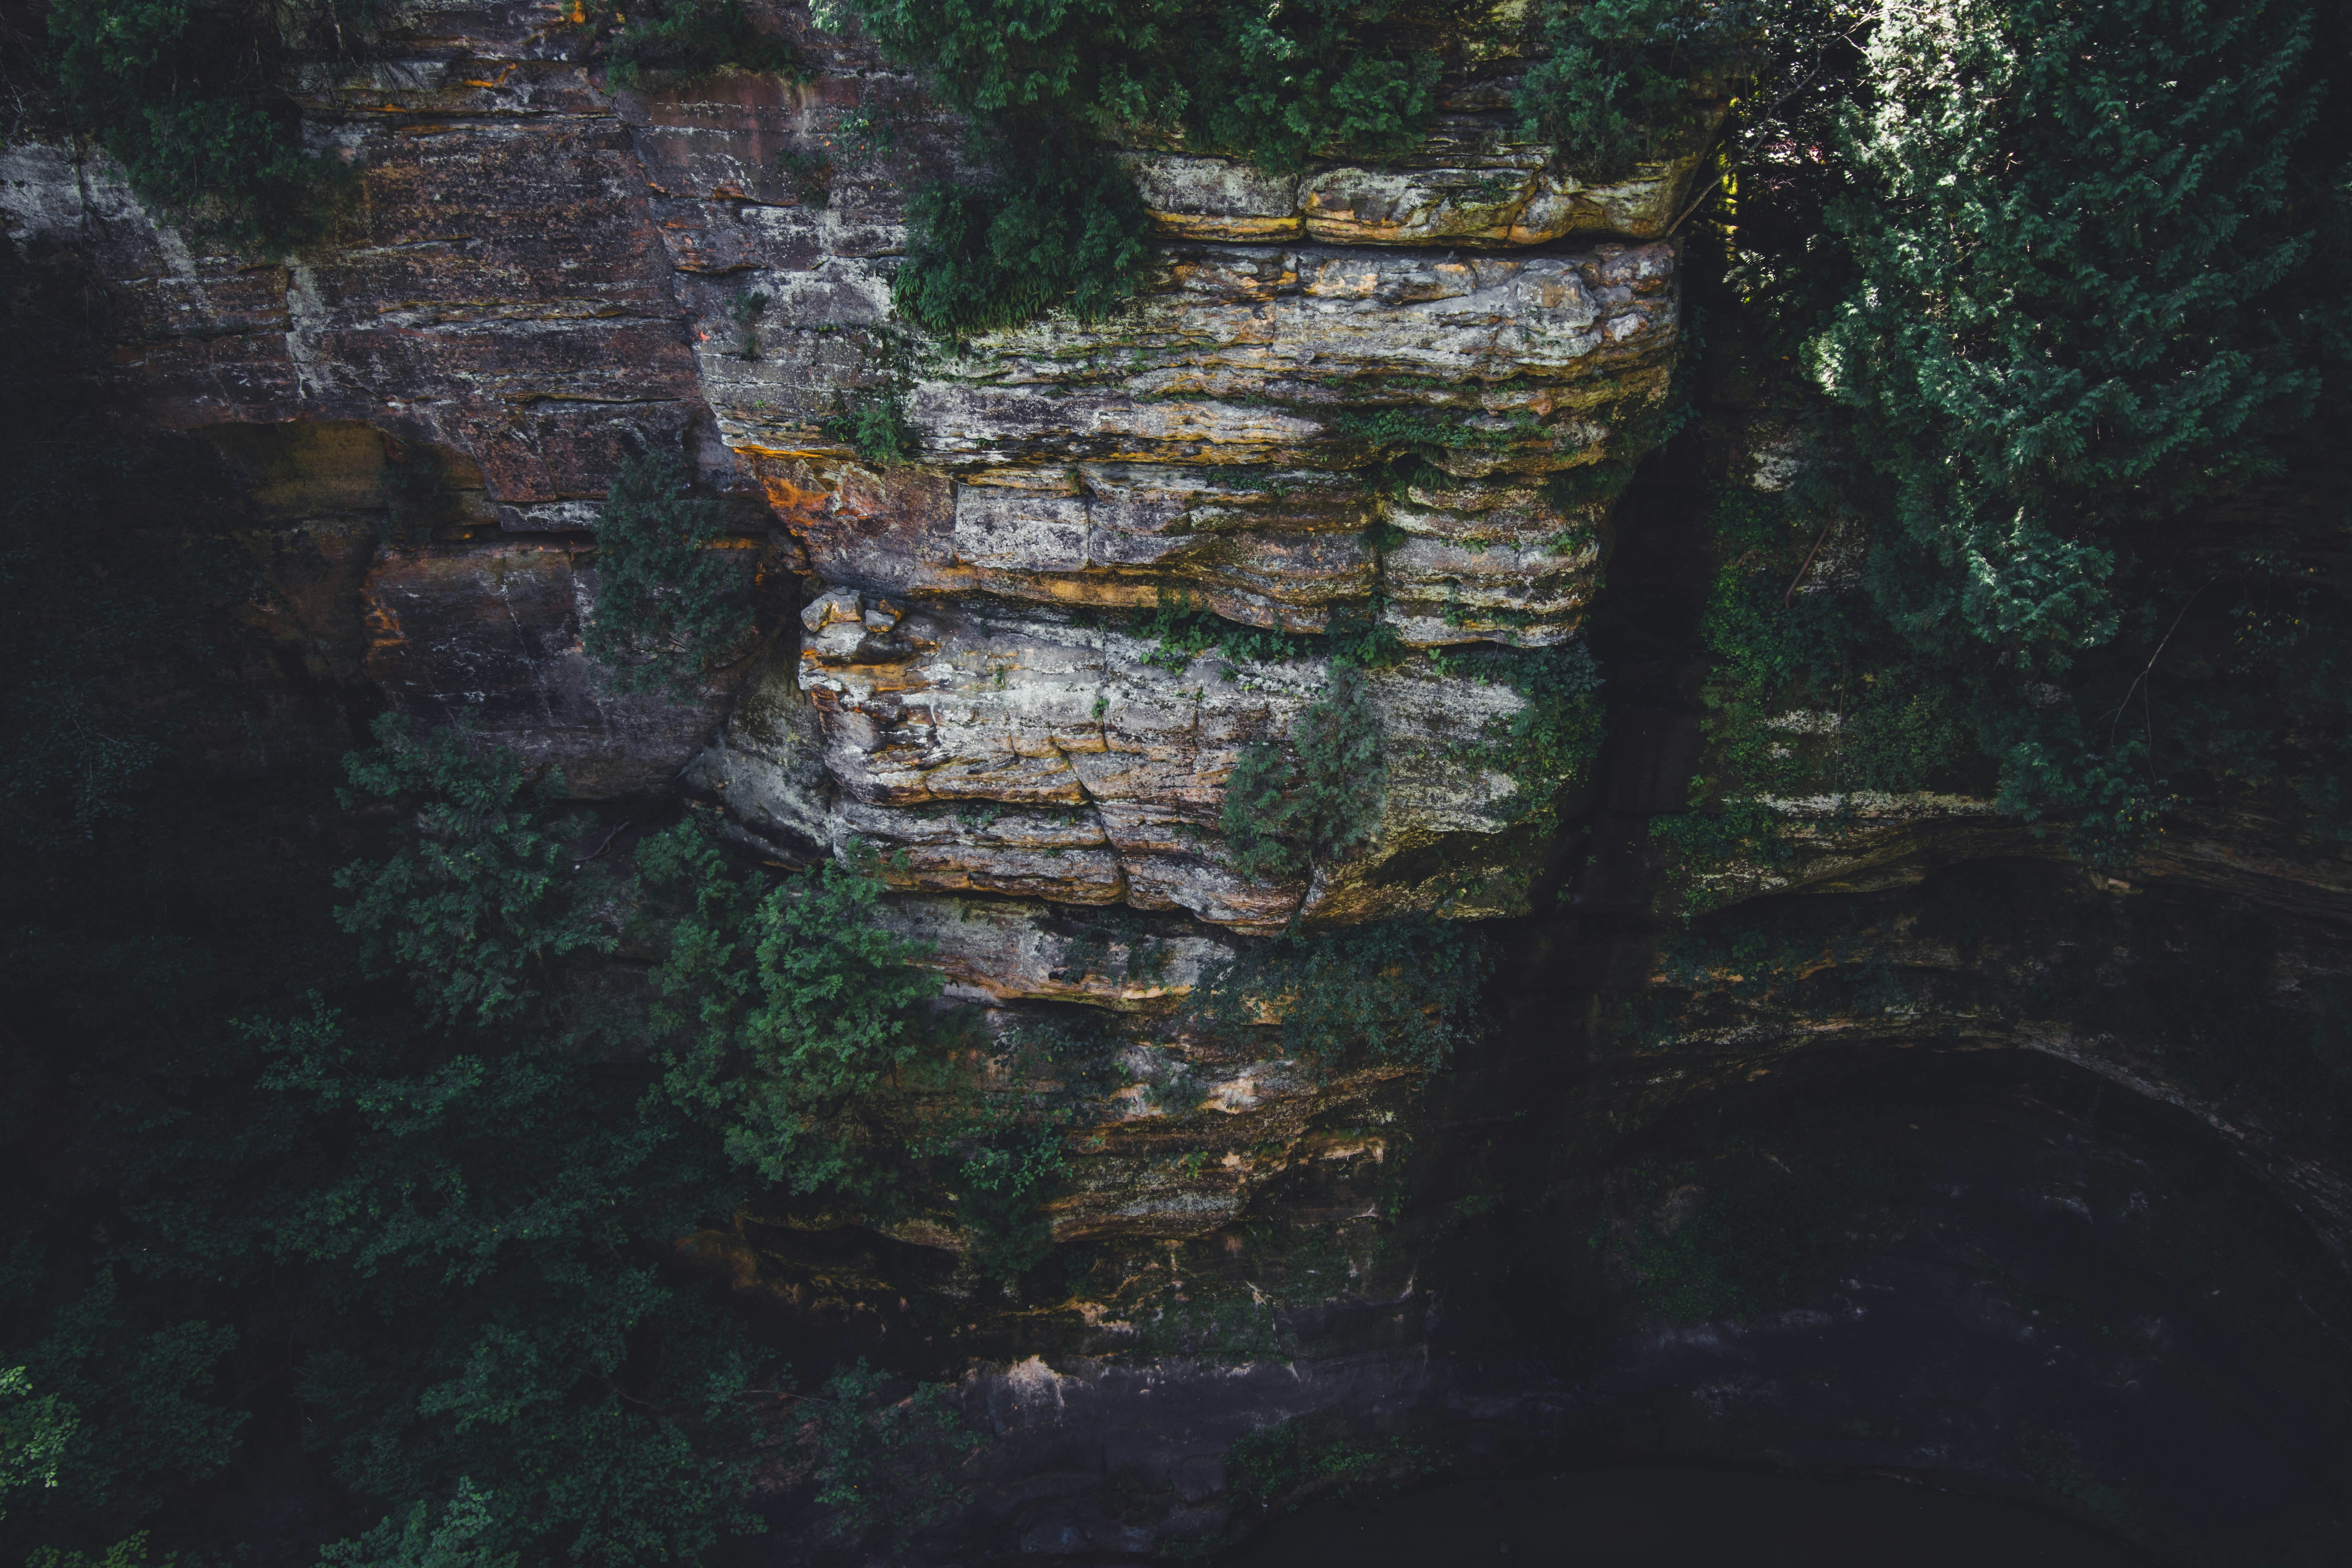 Cliff face surrounded by trees at Starved Rock